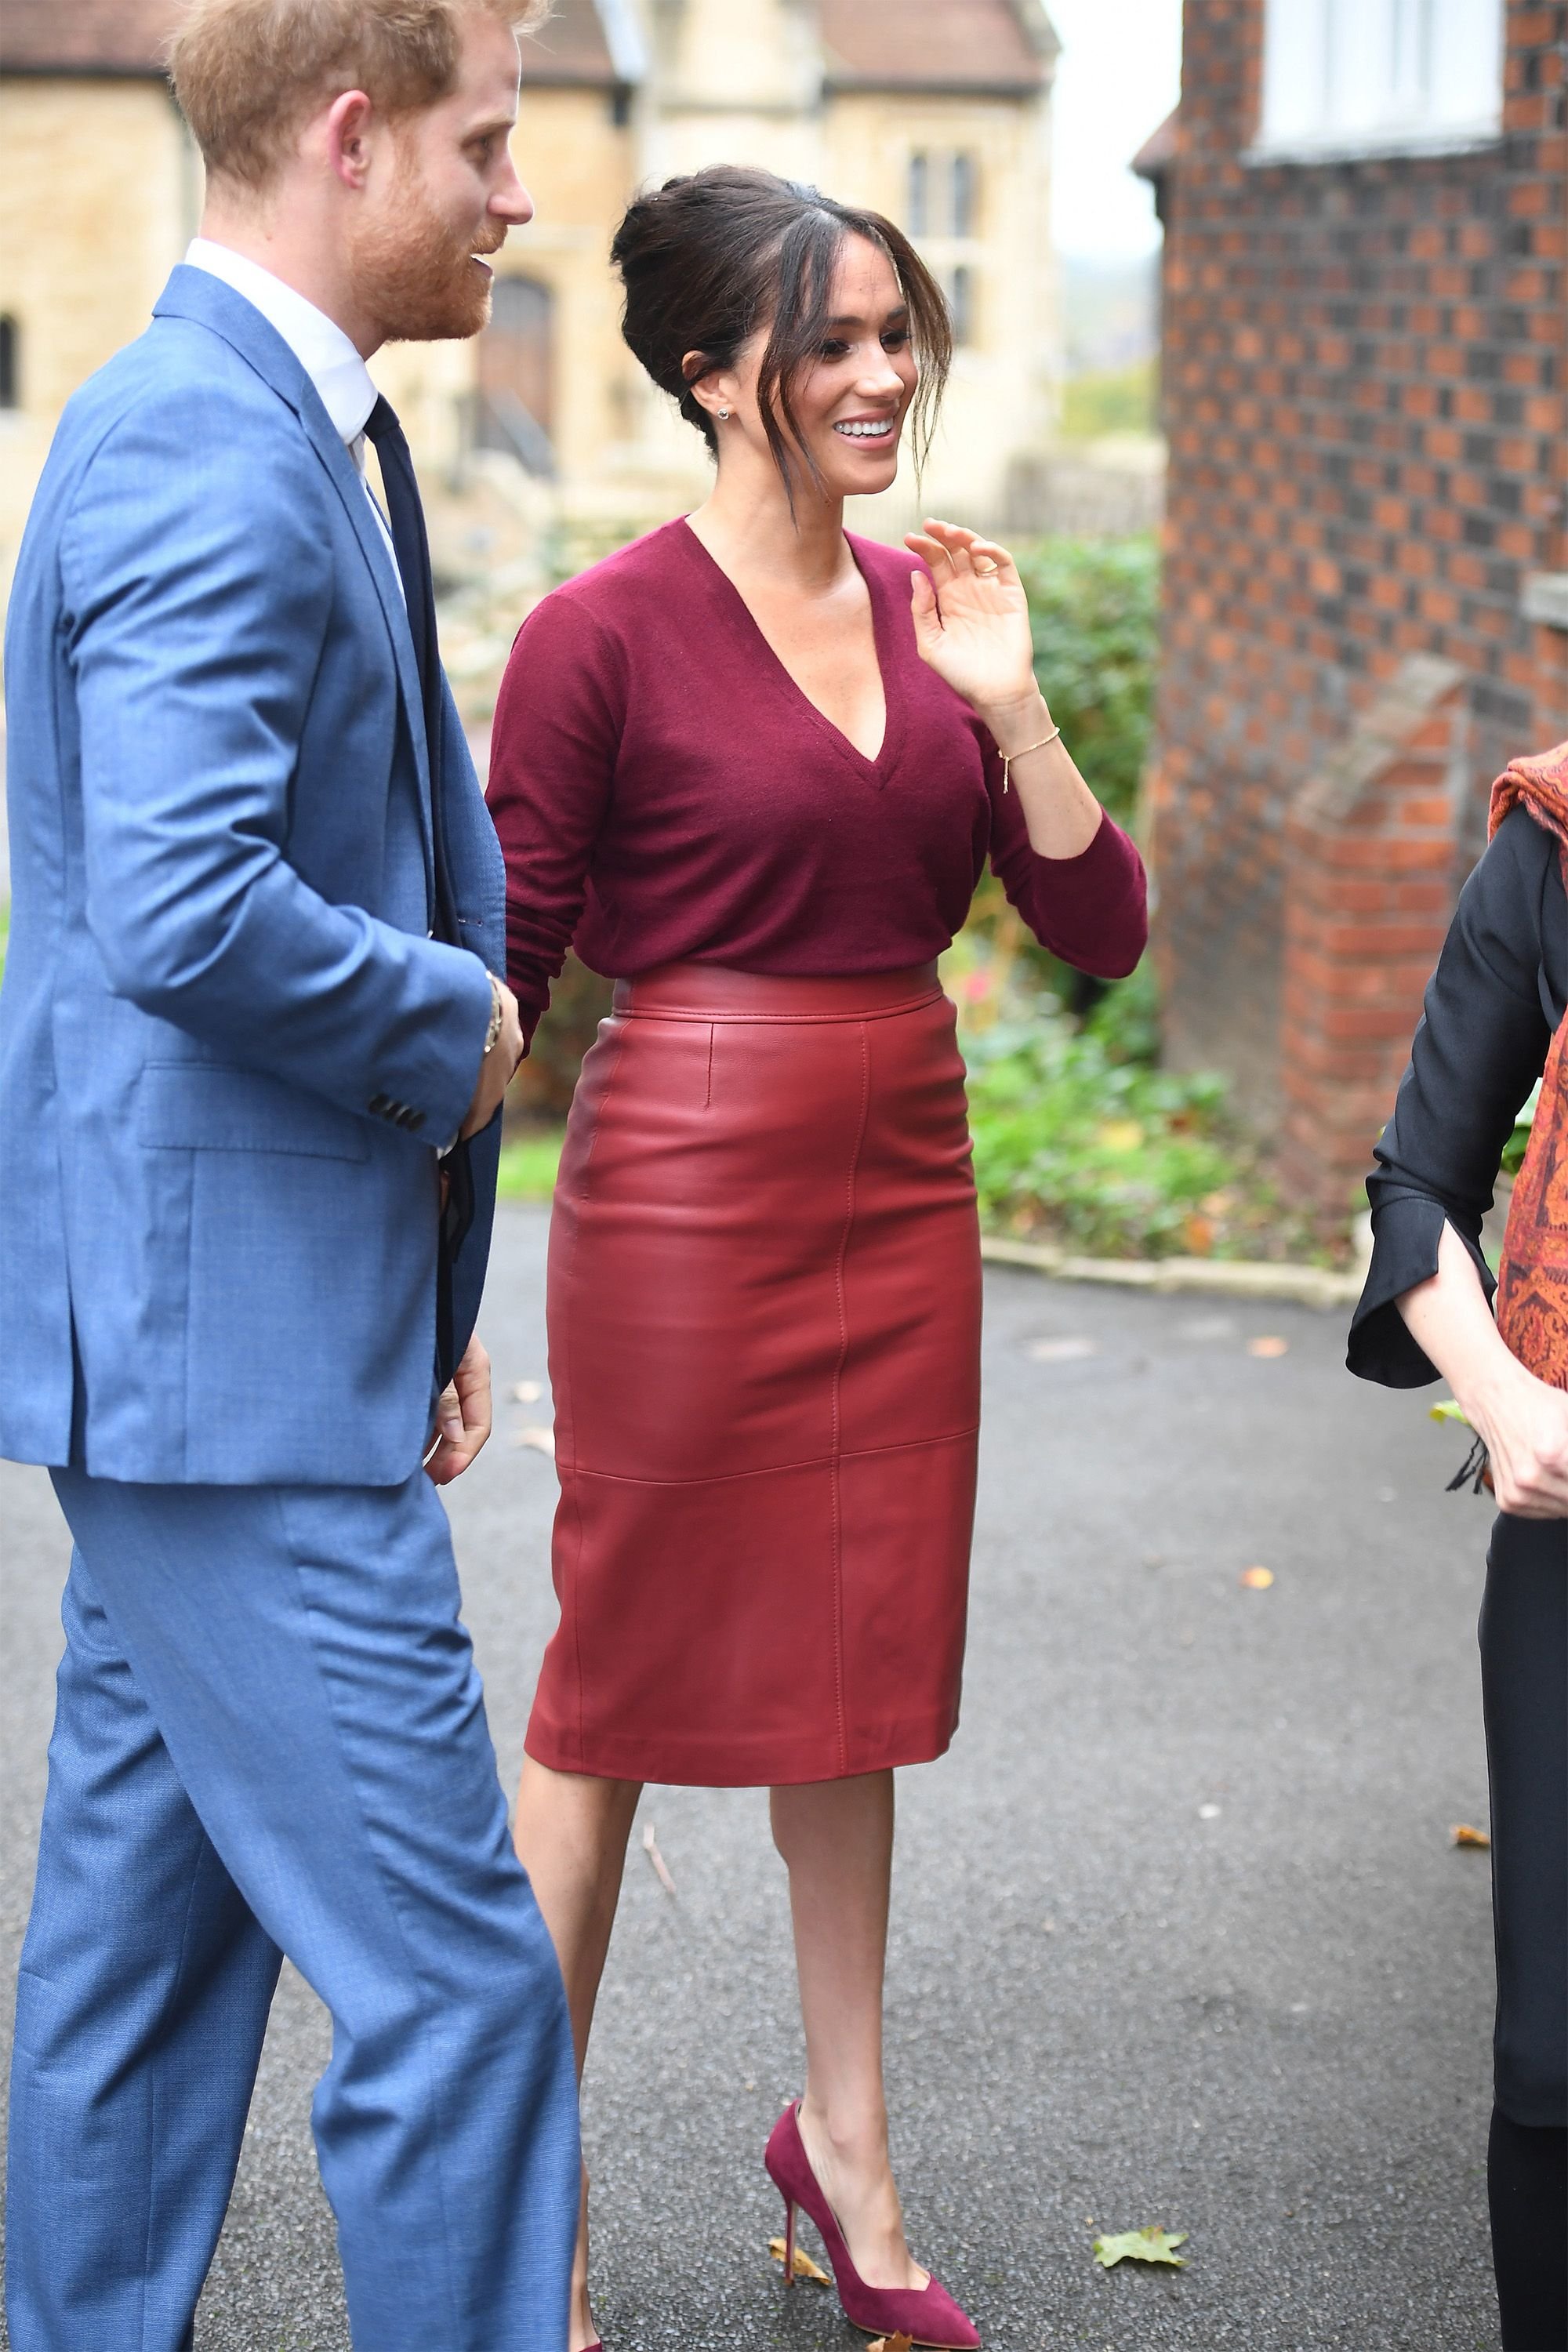 hbz-meghan-markle-style-10-2019-gettyimages-1177991193.jpg